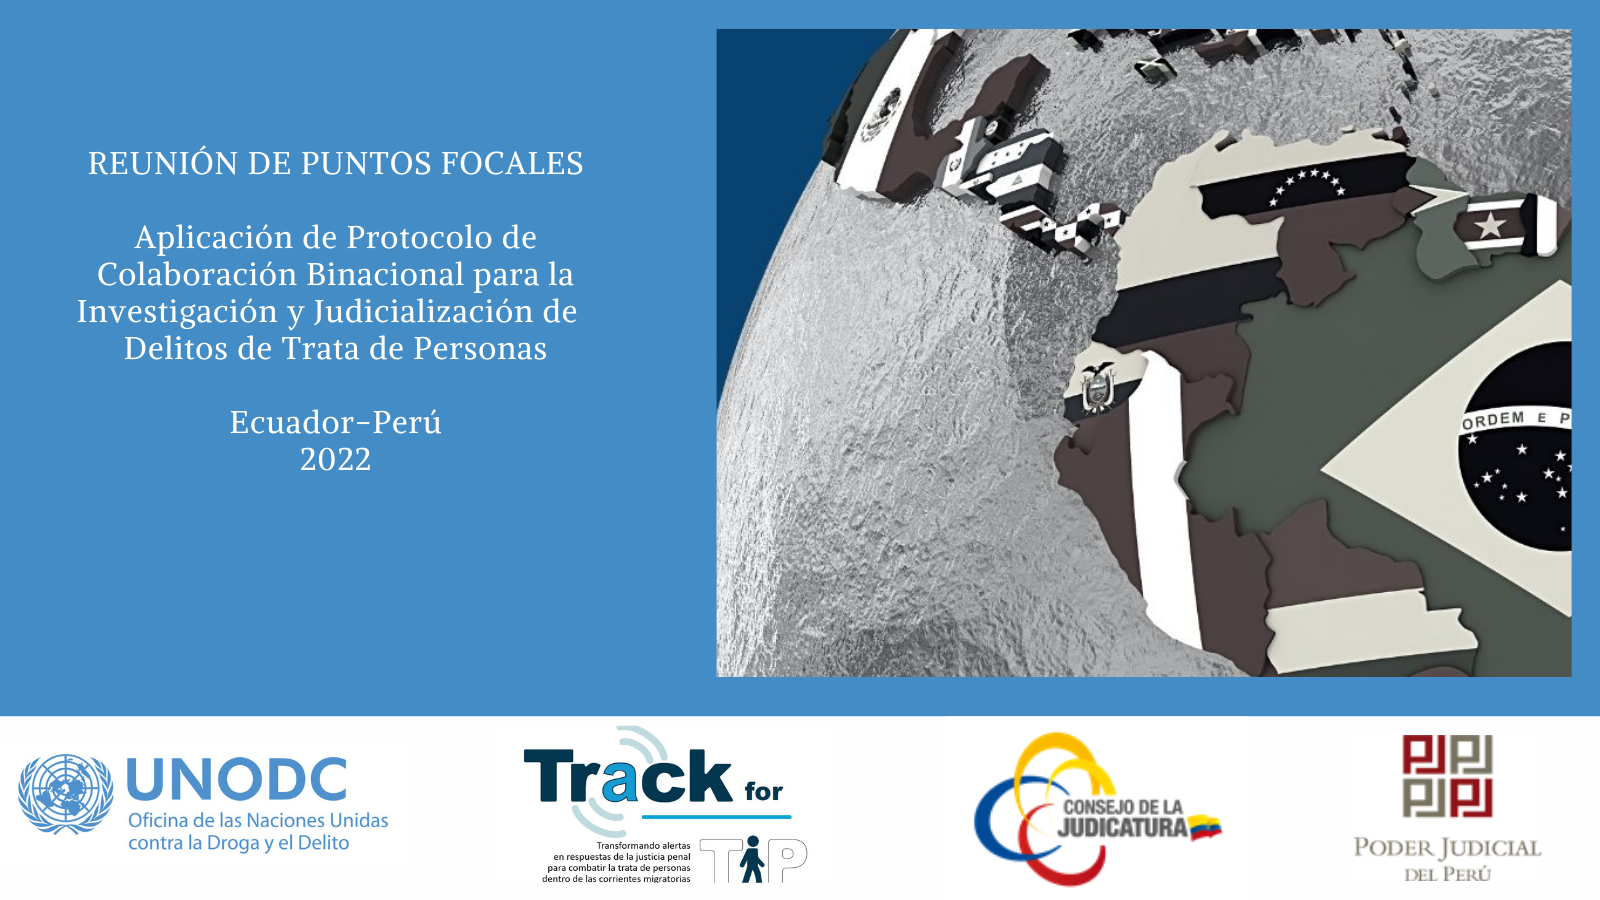 Exchange of timely information and institutional response mechanism among the agreements of the binational meeting to combat human trafficking between Peru and Ecuador